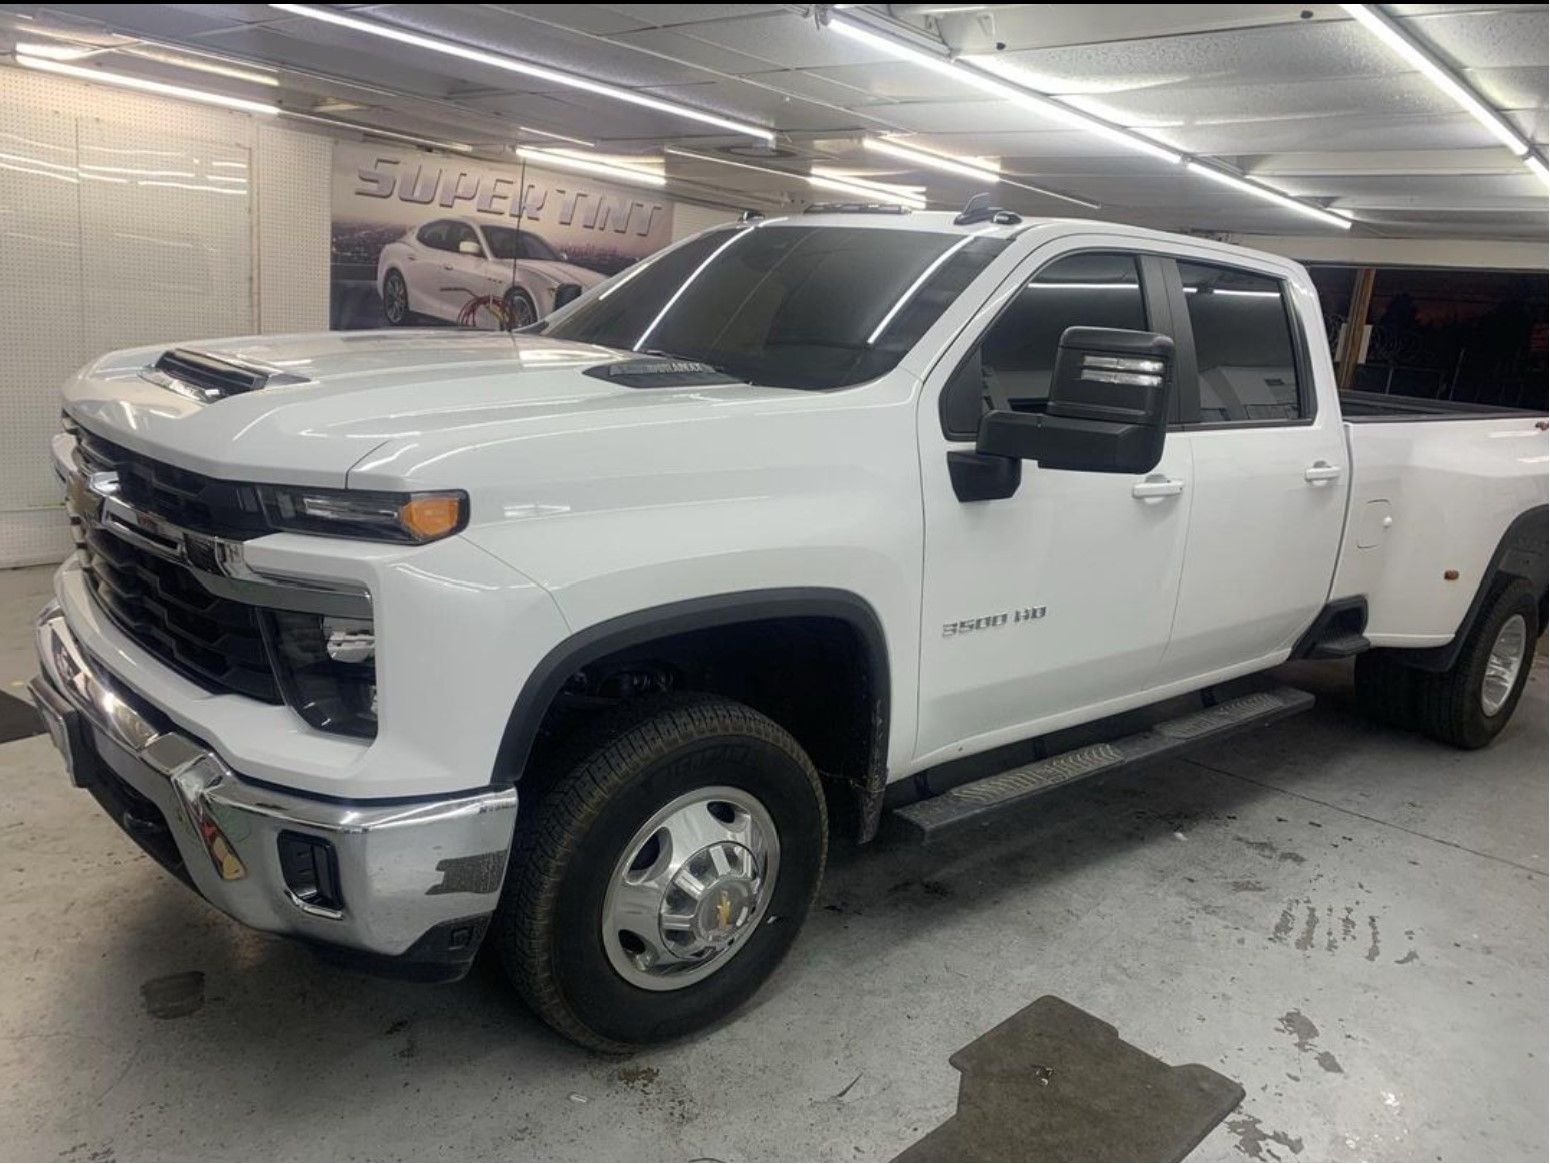 Window tinting a white pickup truck